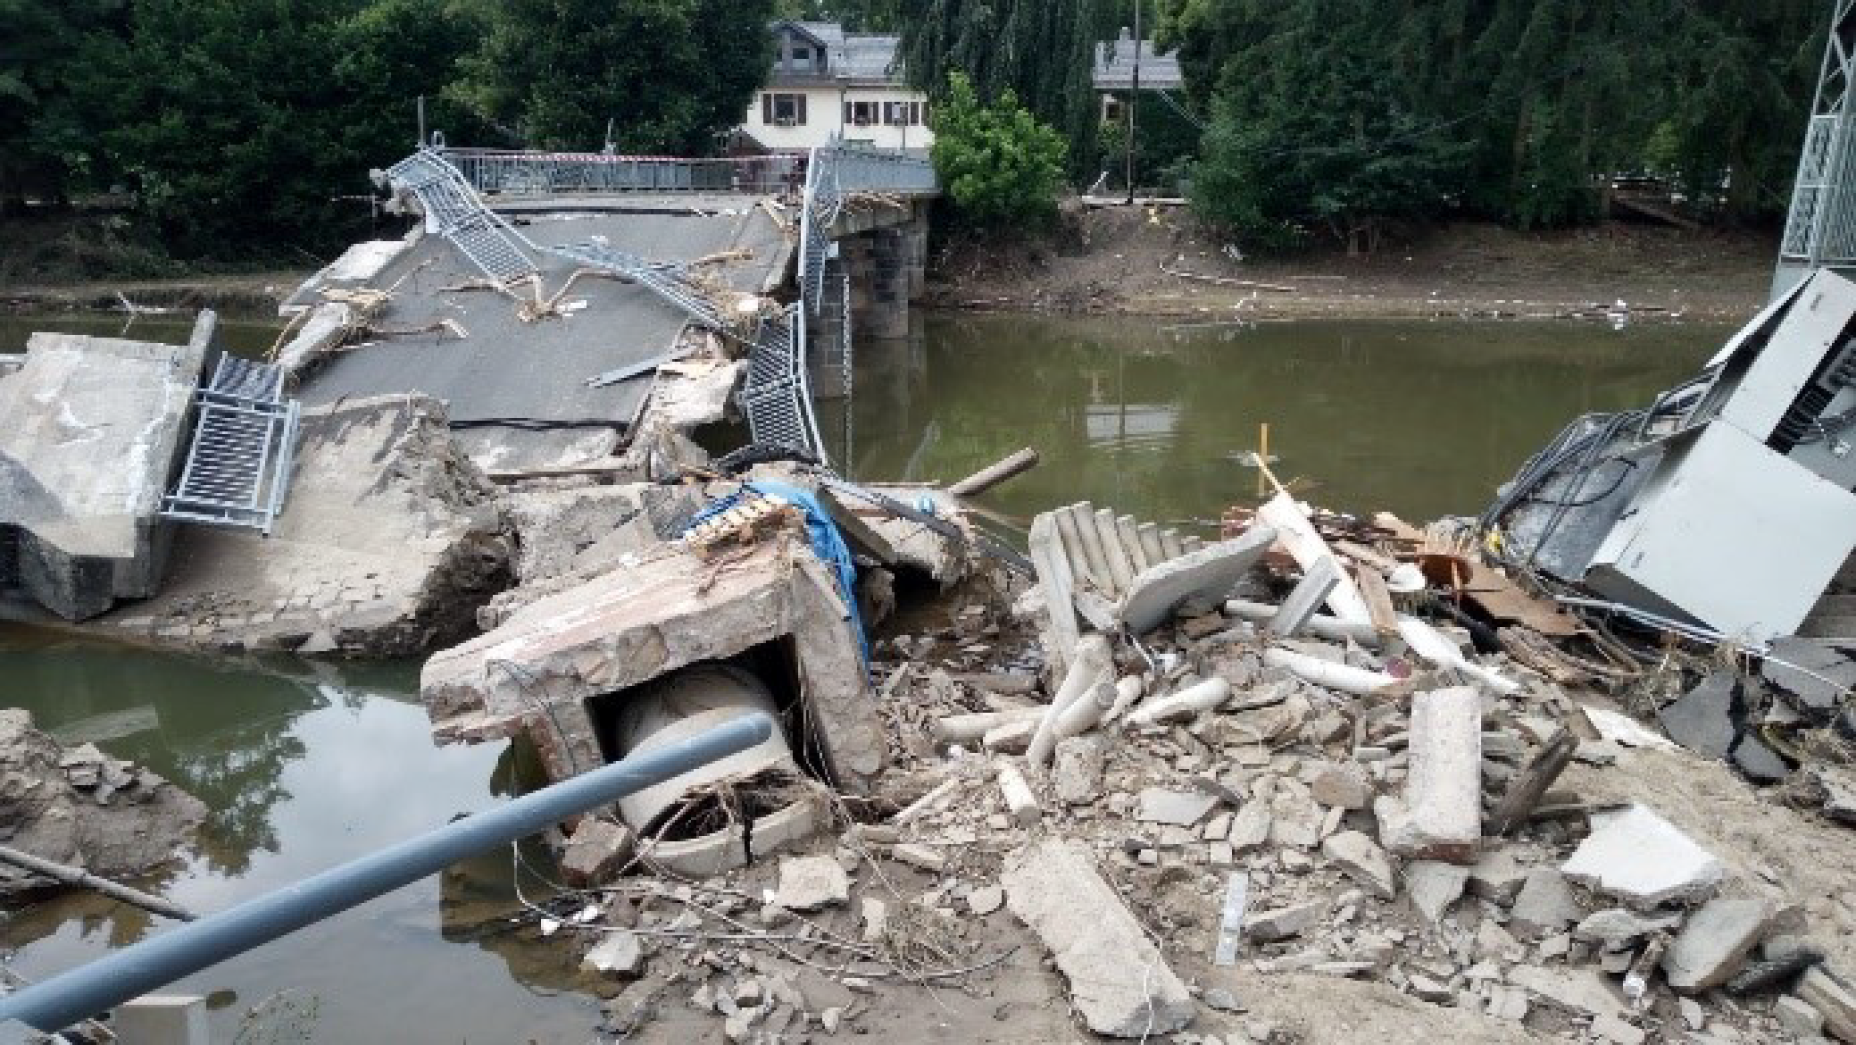 Situation after the 2021 flood on 19 July on the Ahr (near Müsch), a tributary of the Rhine